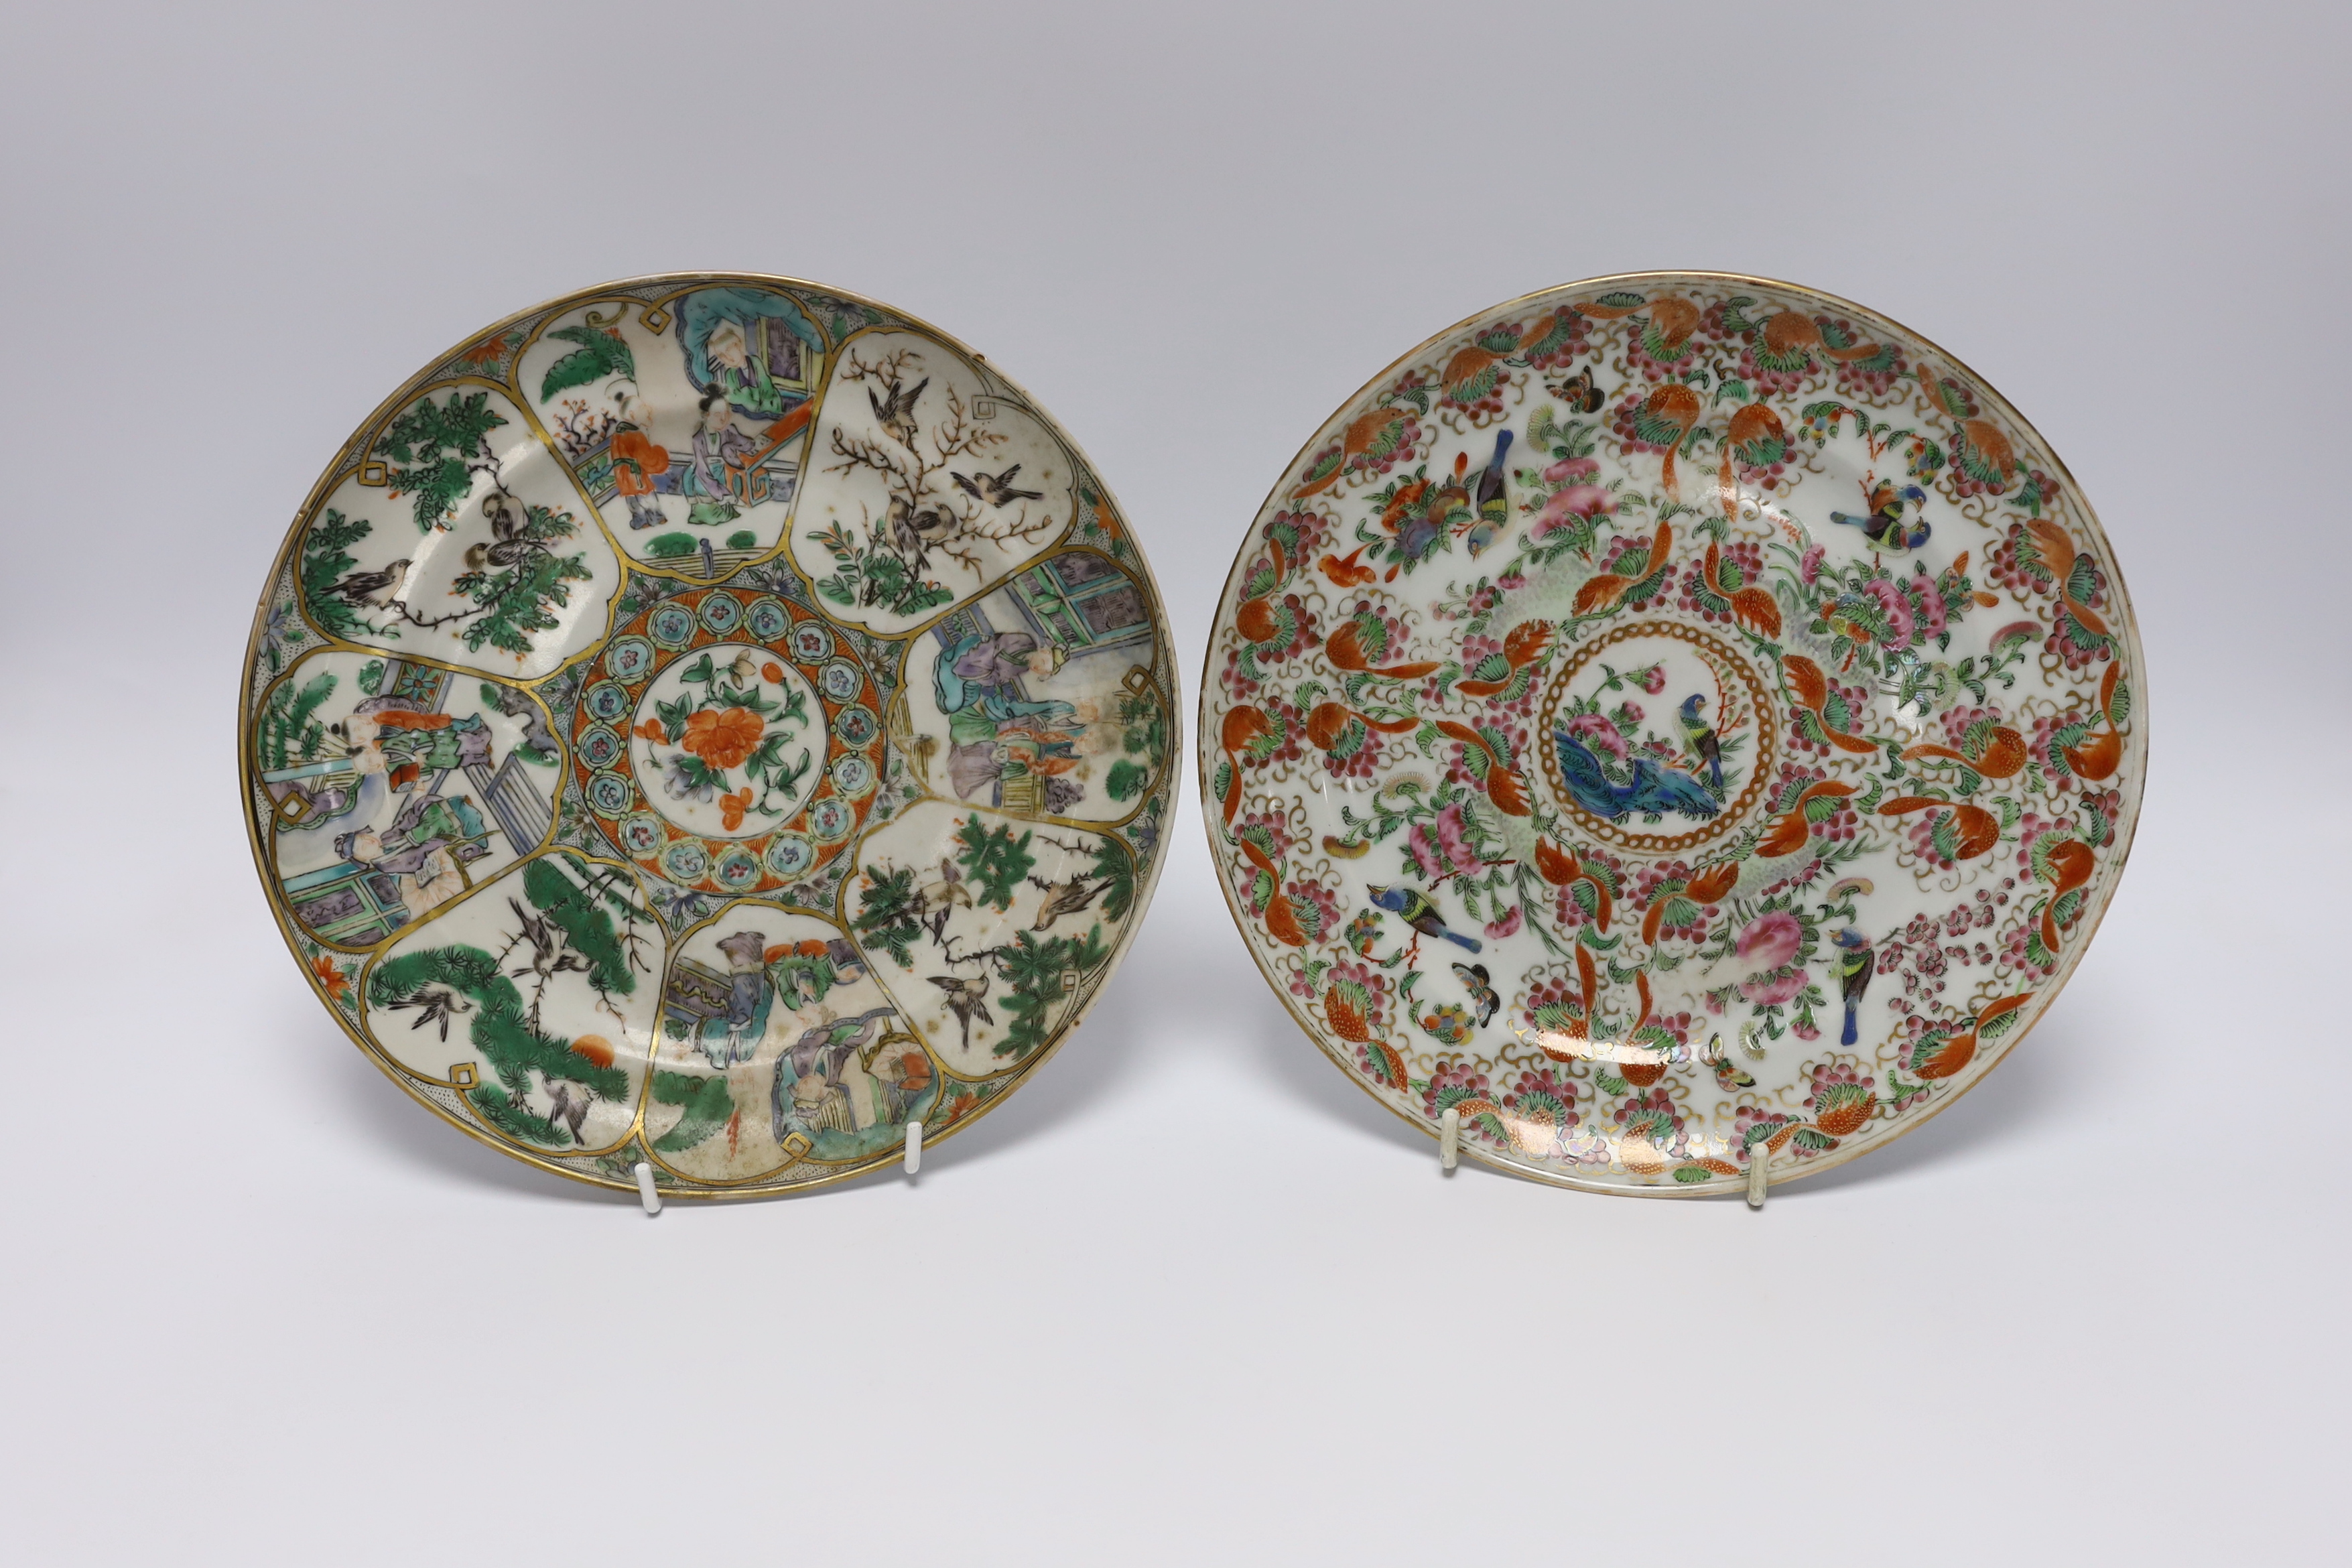 A Chinese famille noire floral dish, Qianlong mark, late 19th/early 20th century and two Chinese enamelled porcelain plates, 19th century, famille noir dish 23.5cm diameter